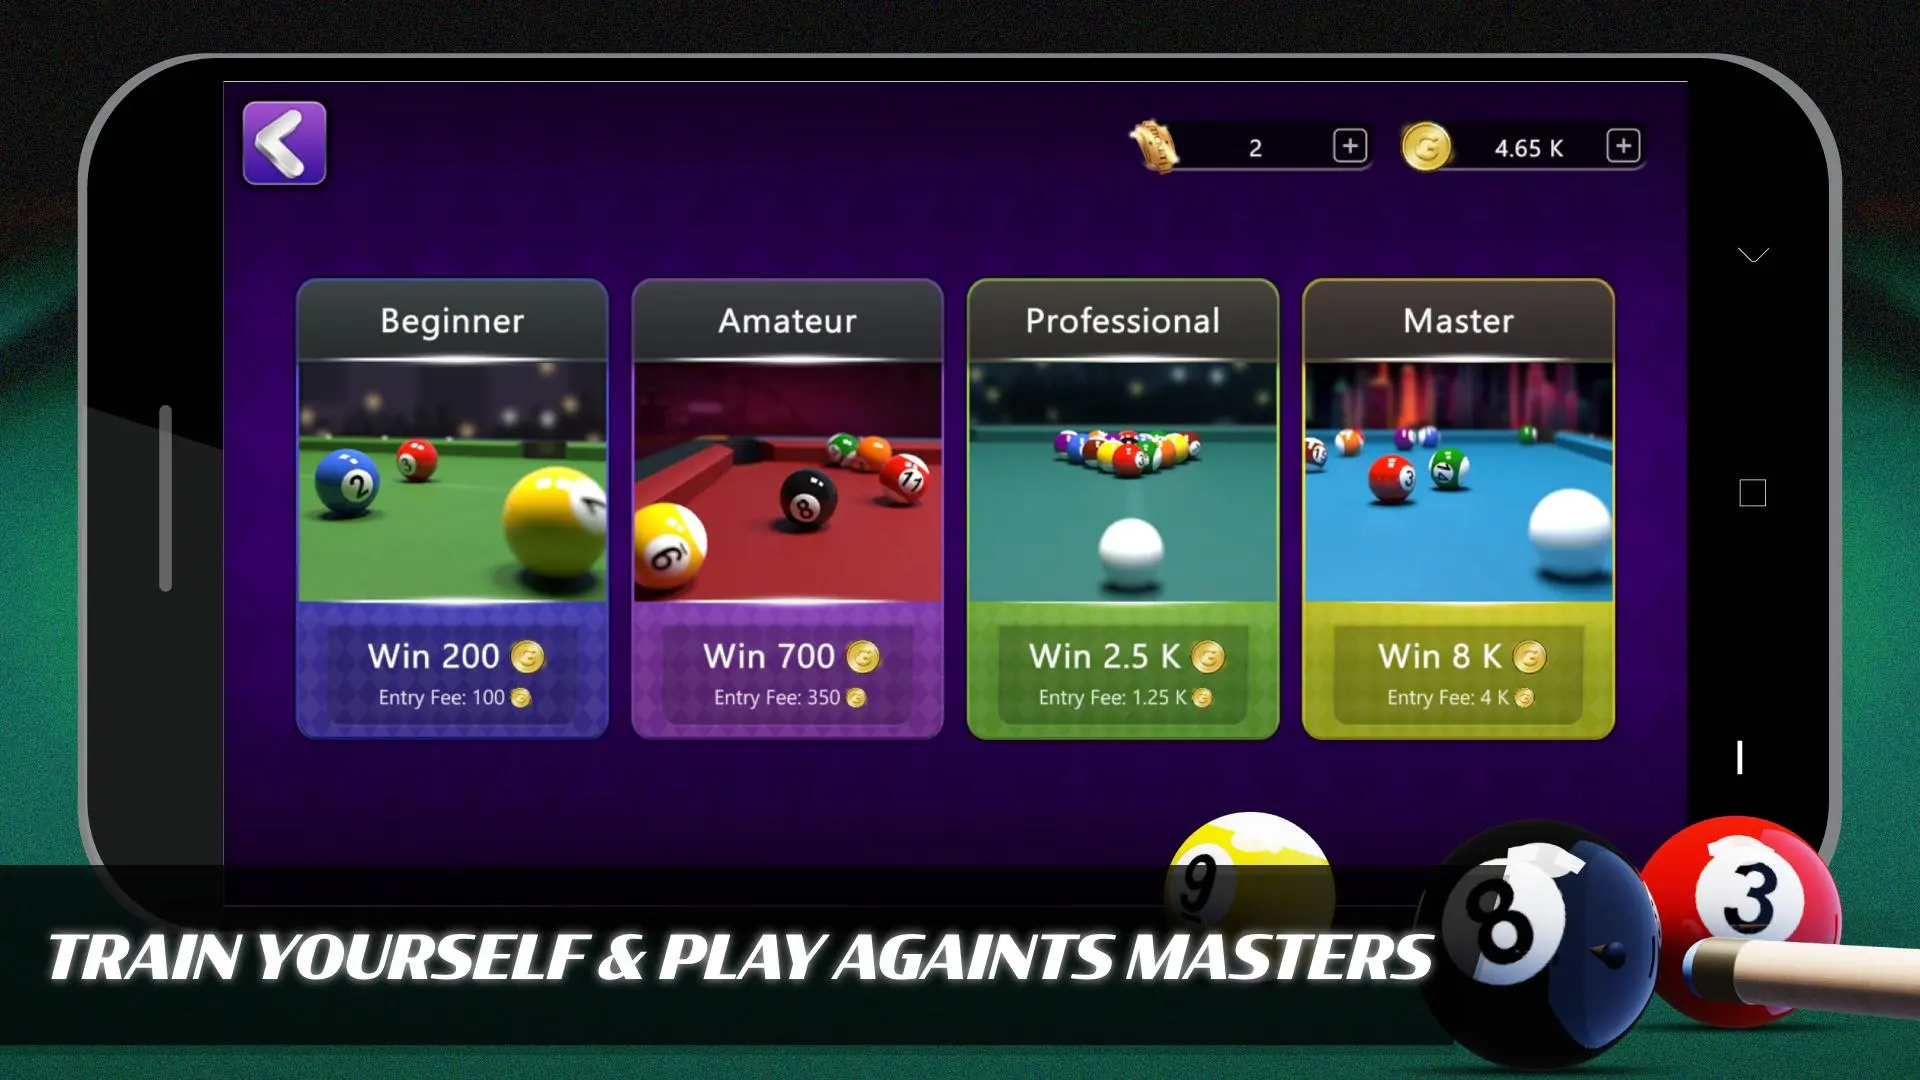 8 Ball Billiard Online::Appstore for Android